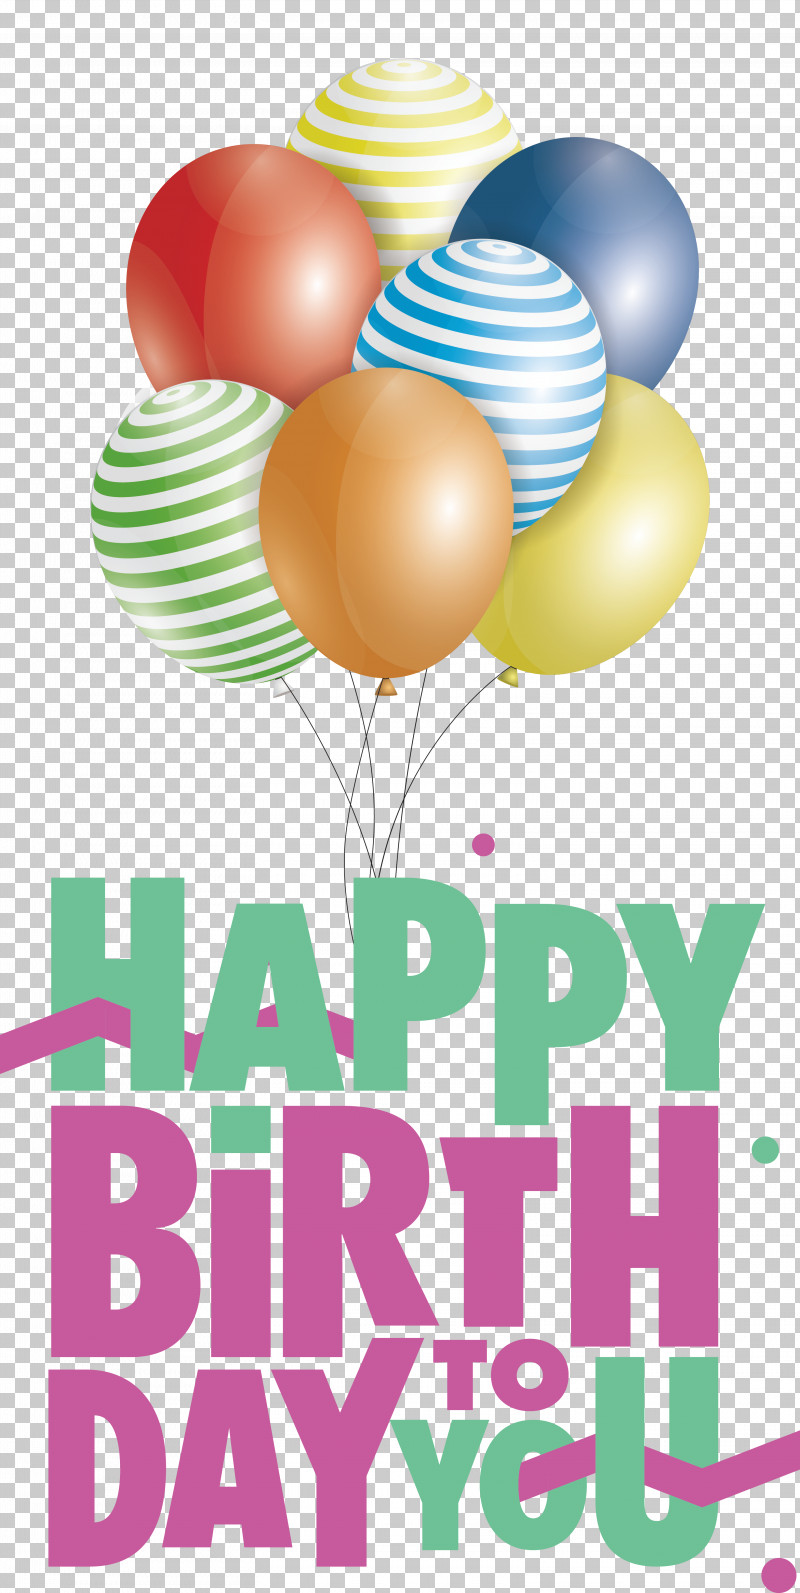 Balloon Text Birthday Line Happiness PNG, Clipart, Balloon, Birthday, Geometry, Happiness, Line Free PNG Download